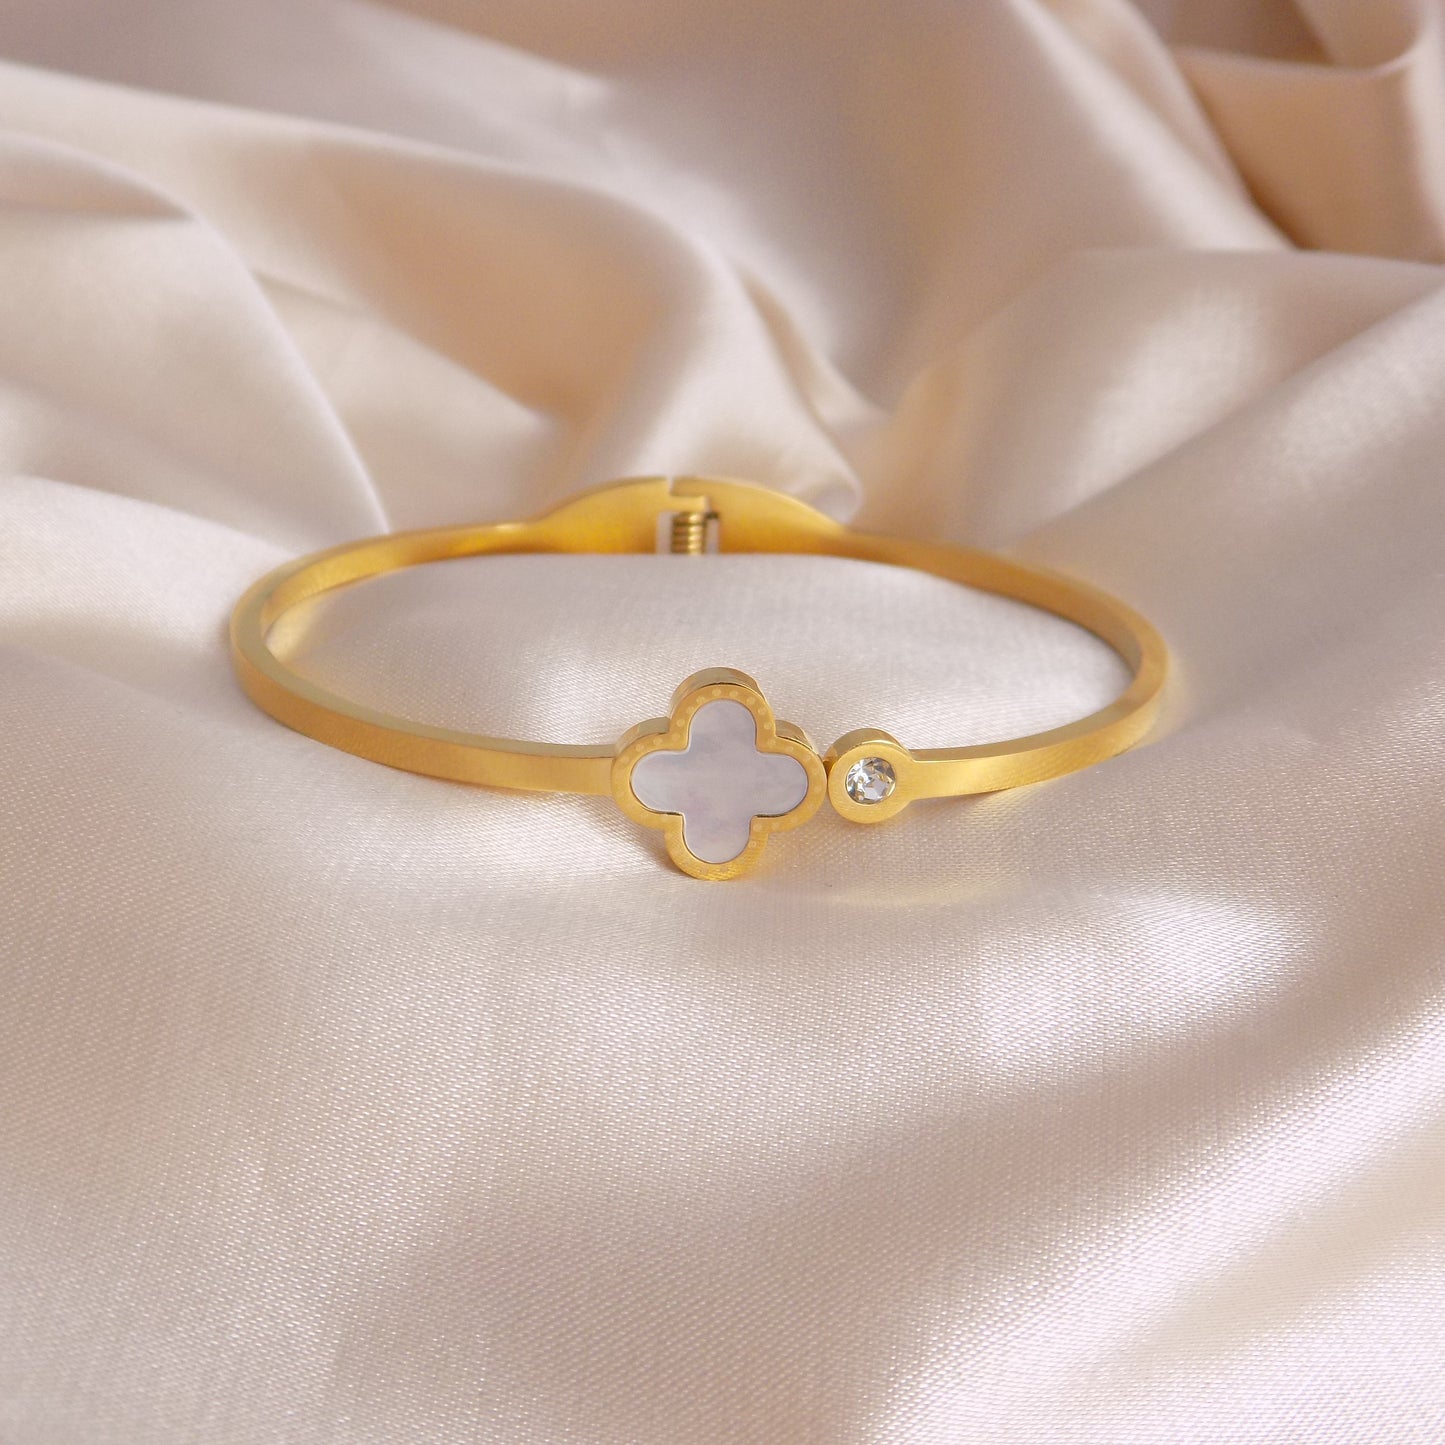 Mother of Pearl Clover Bangle Bracelet - 18K Gold Stainless Steel - Minimalist Jewelry